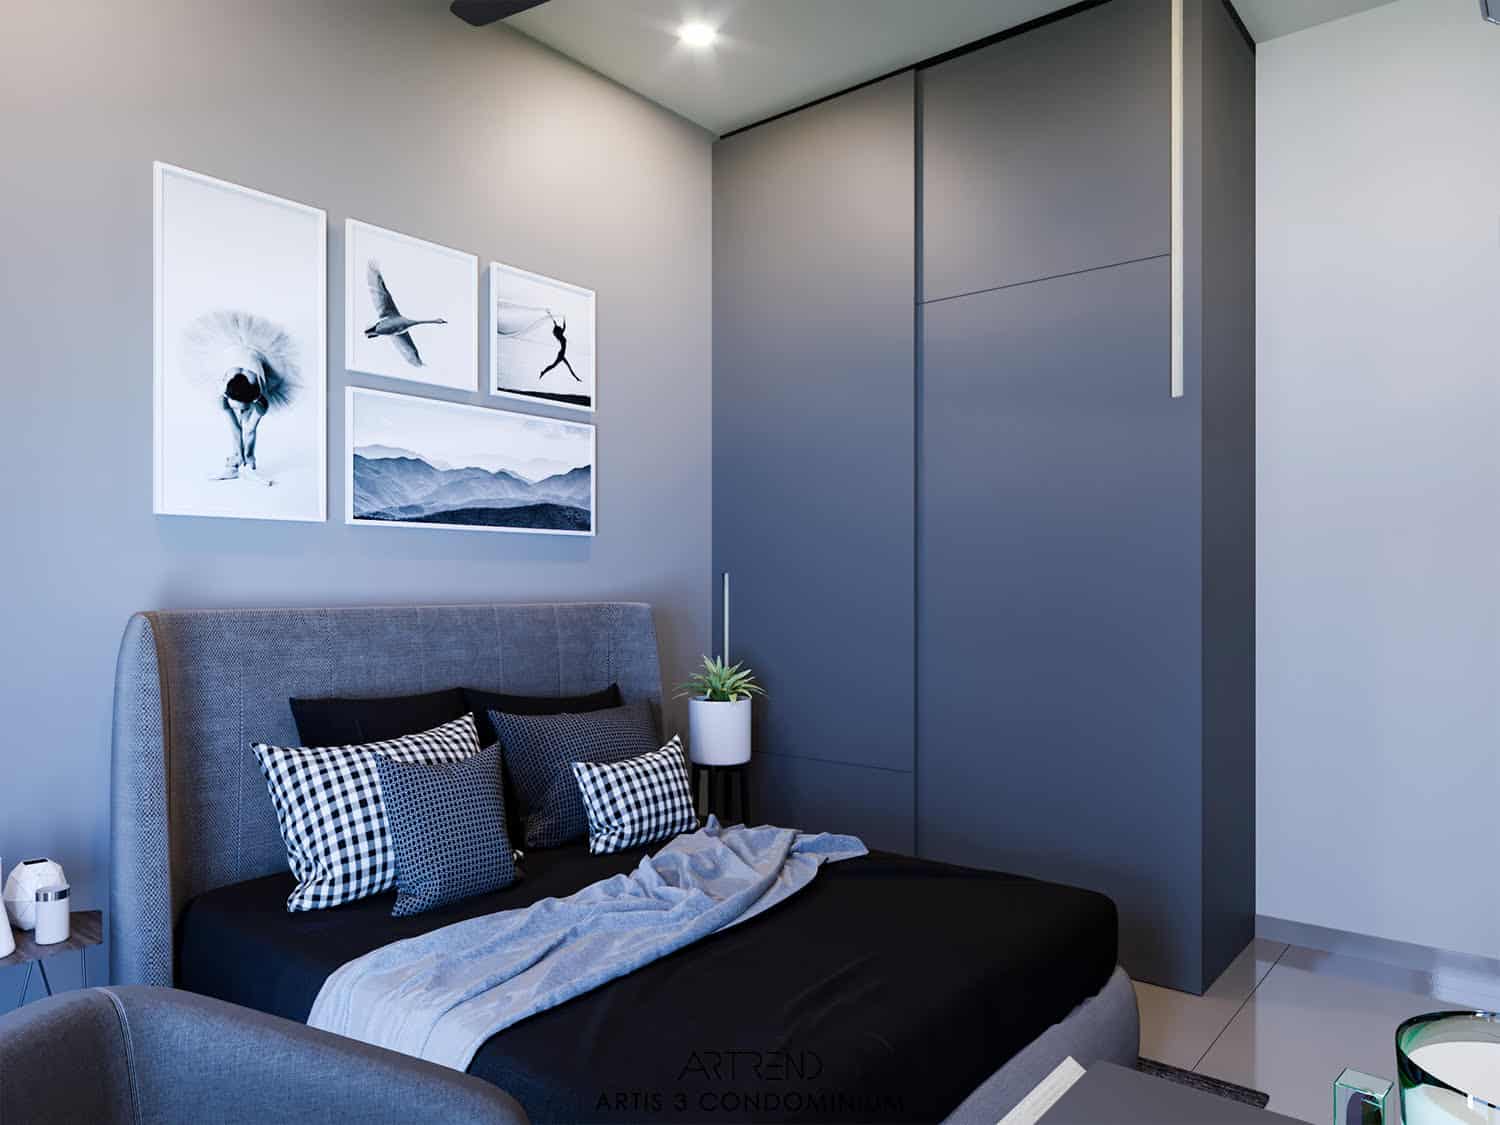 8 Small Bedroom Ideas That Get The Most Out Of A Small Space20210719093421 